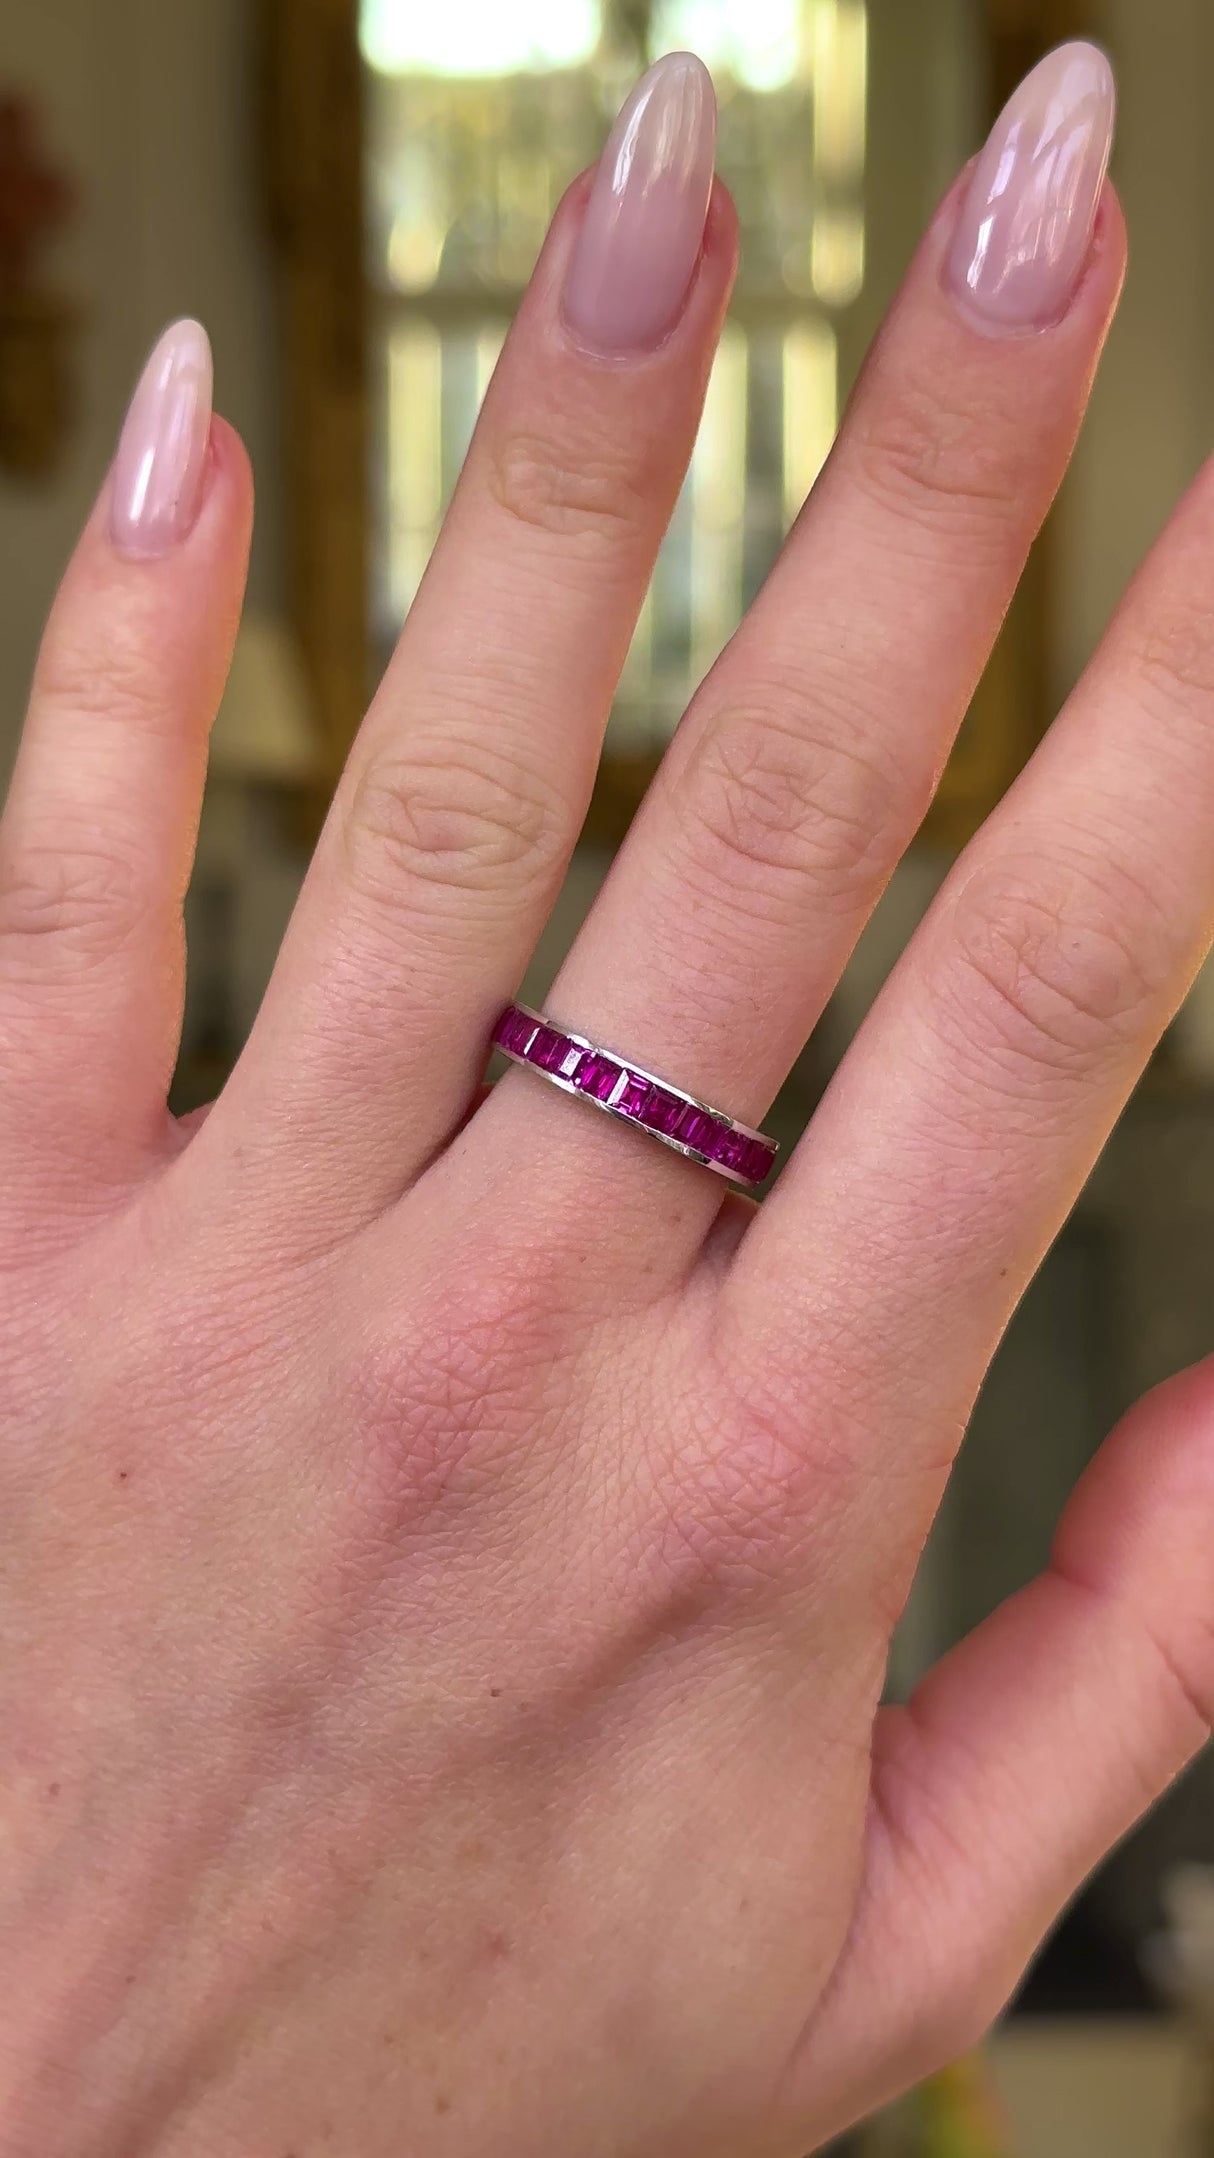 Vintage ruby eternity ring worn on hand and moved around to give perspective.